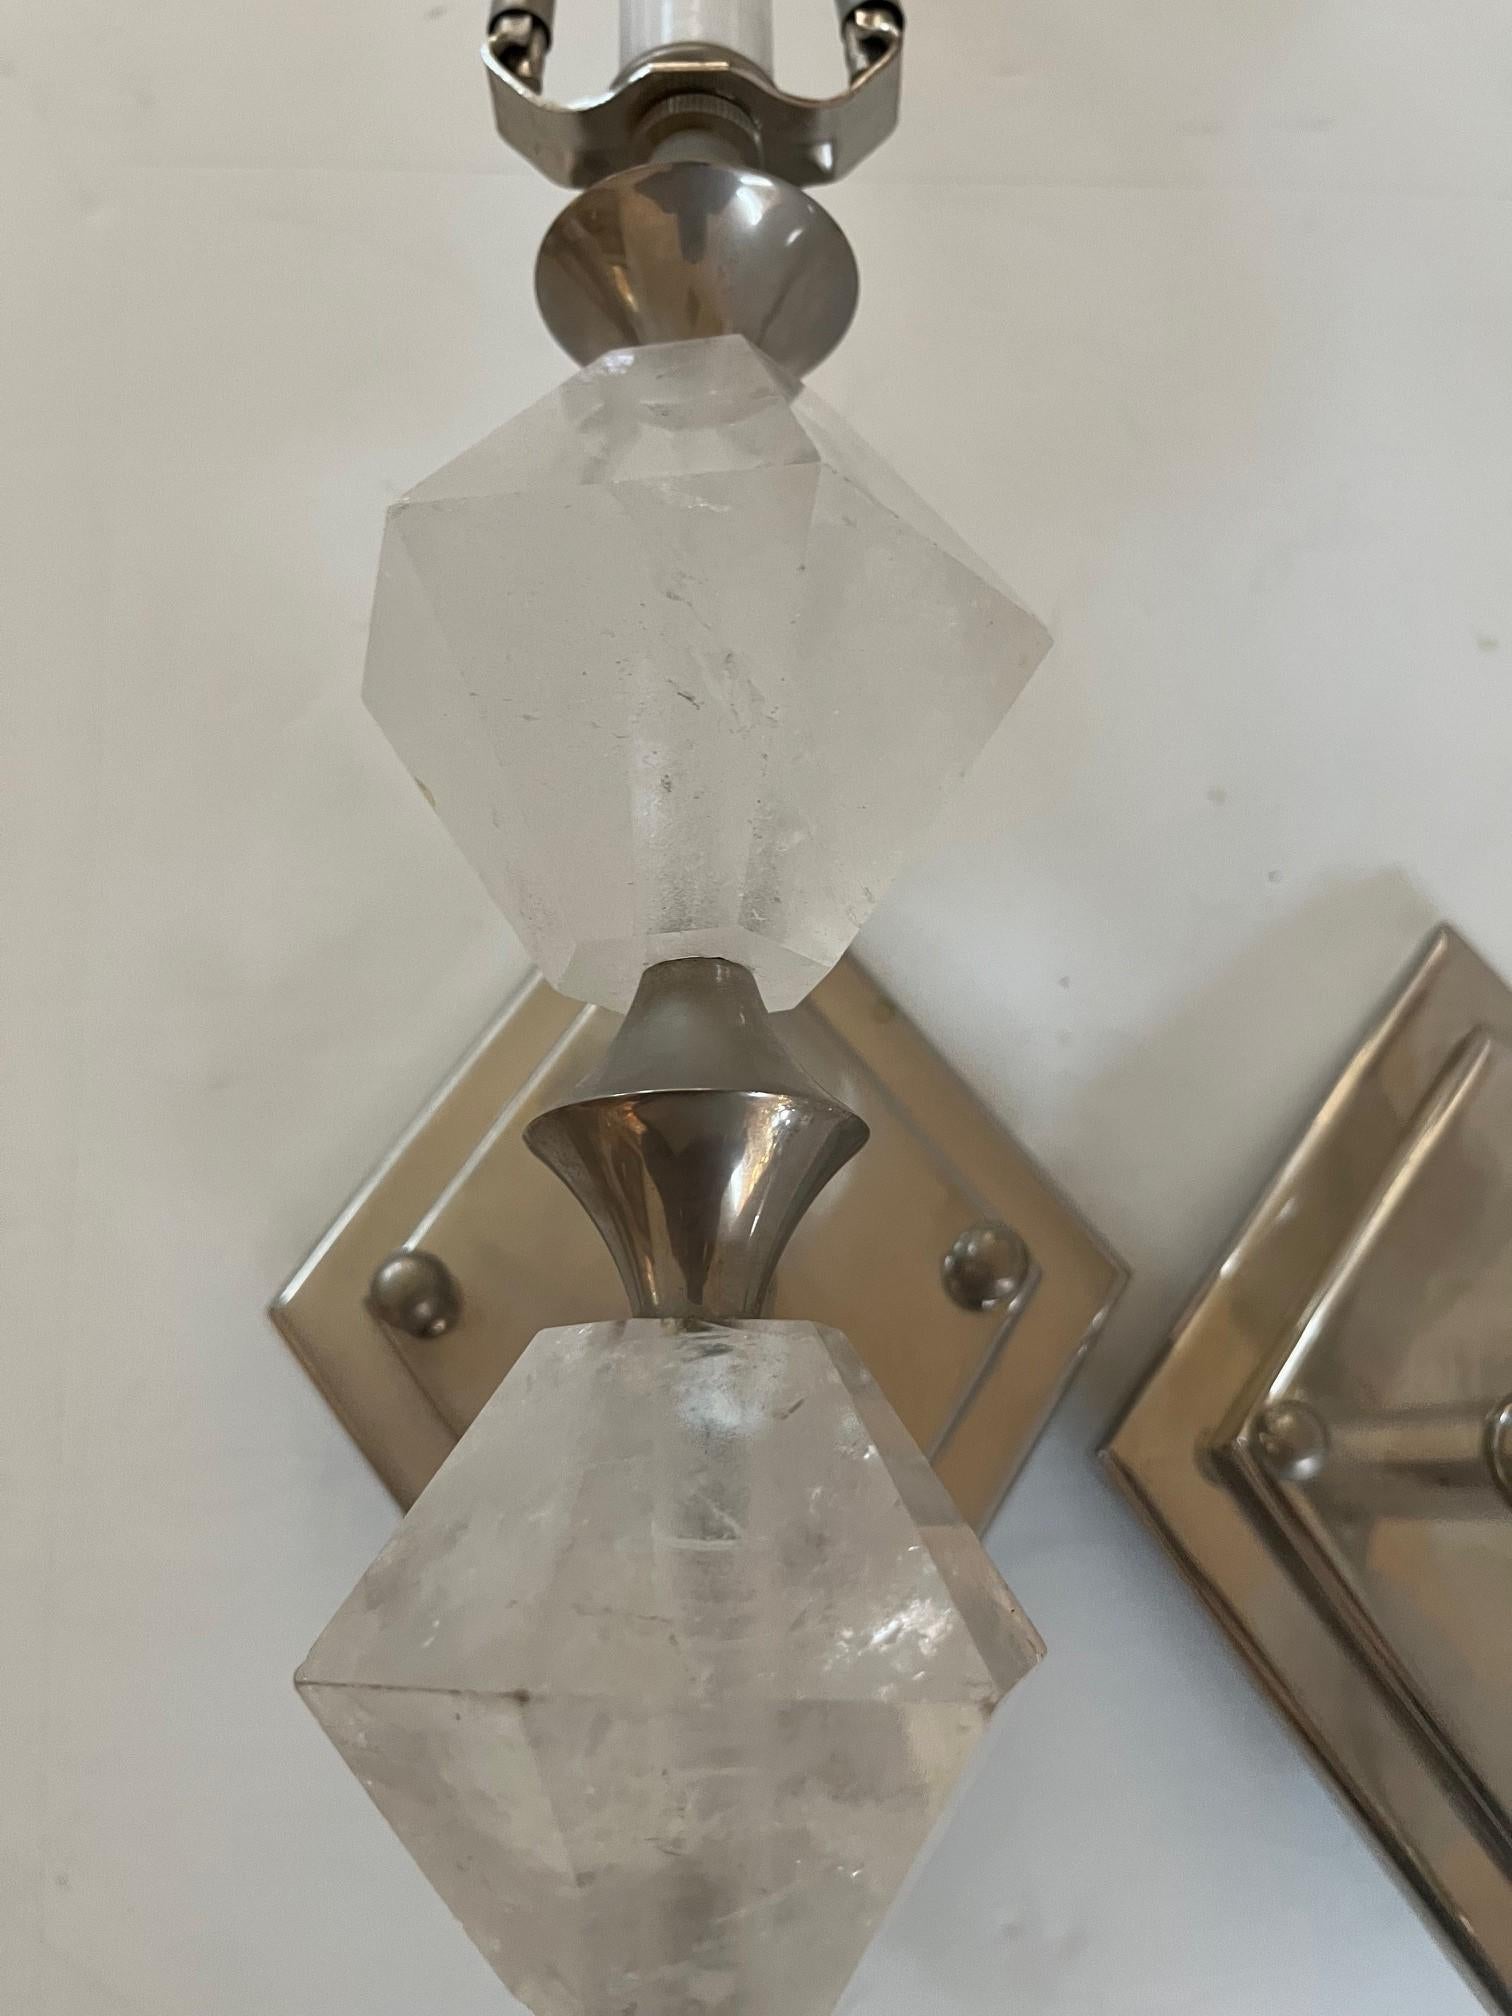 Pair of Art Deco Modern Rock Crystal Sconces Designed by Interior Designer in Los Angeles, Custom Made in Diamond Shape Design with a Double Diamond back Plate in Hi Polished Nickle Finish, Rock Crystal Imported from Brazil, Sconces have a Single